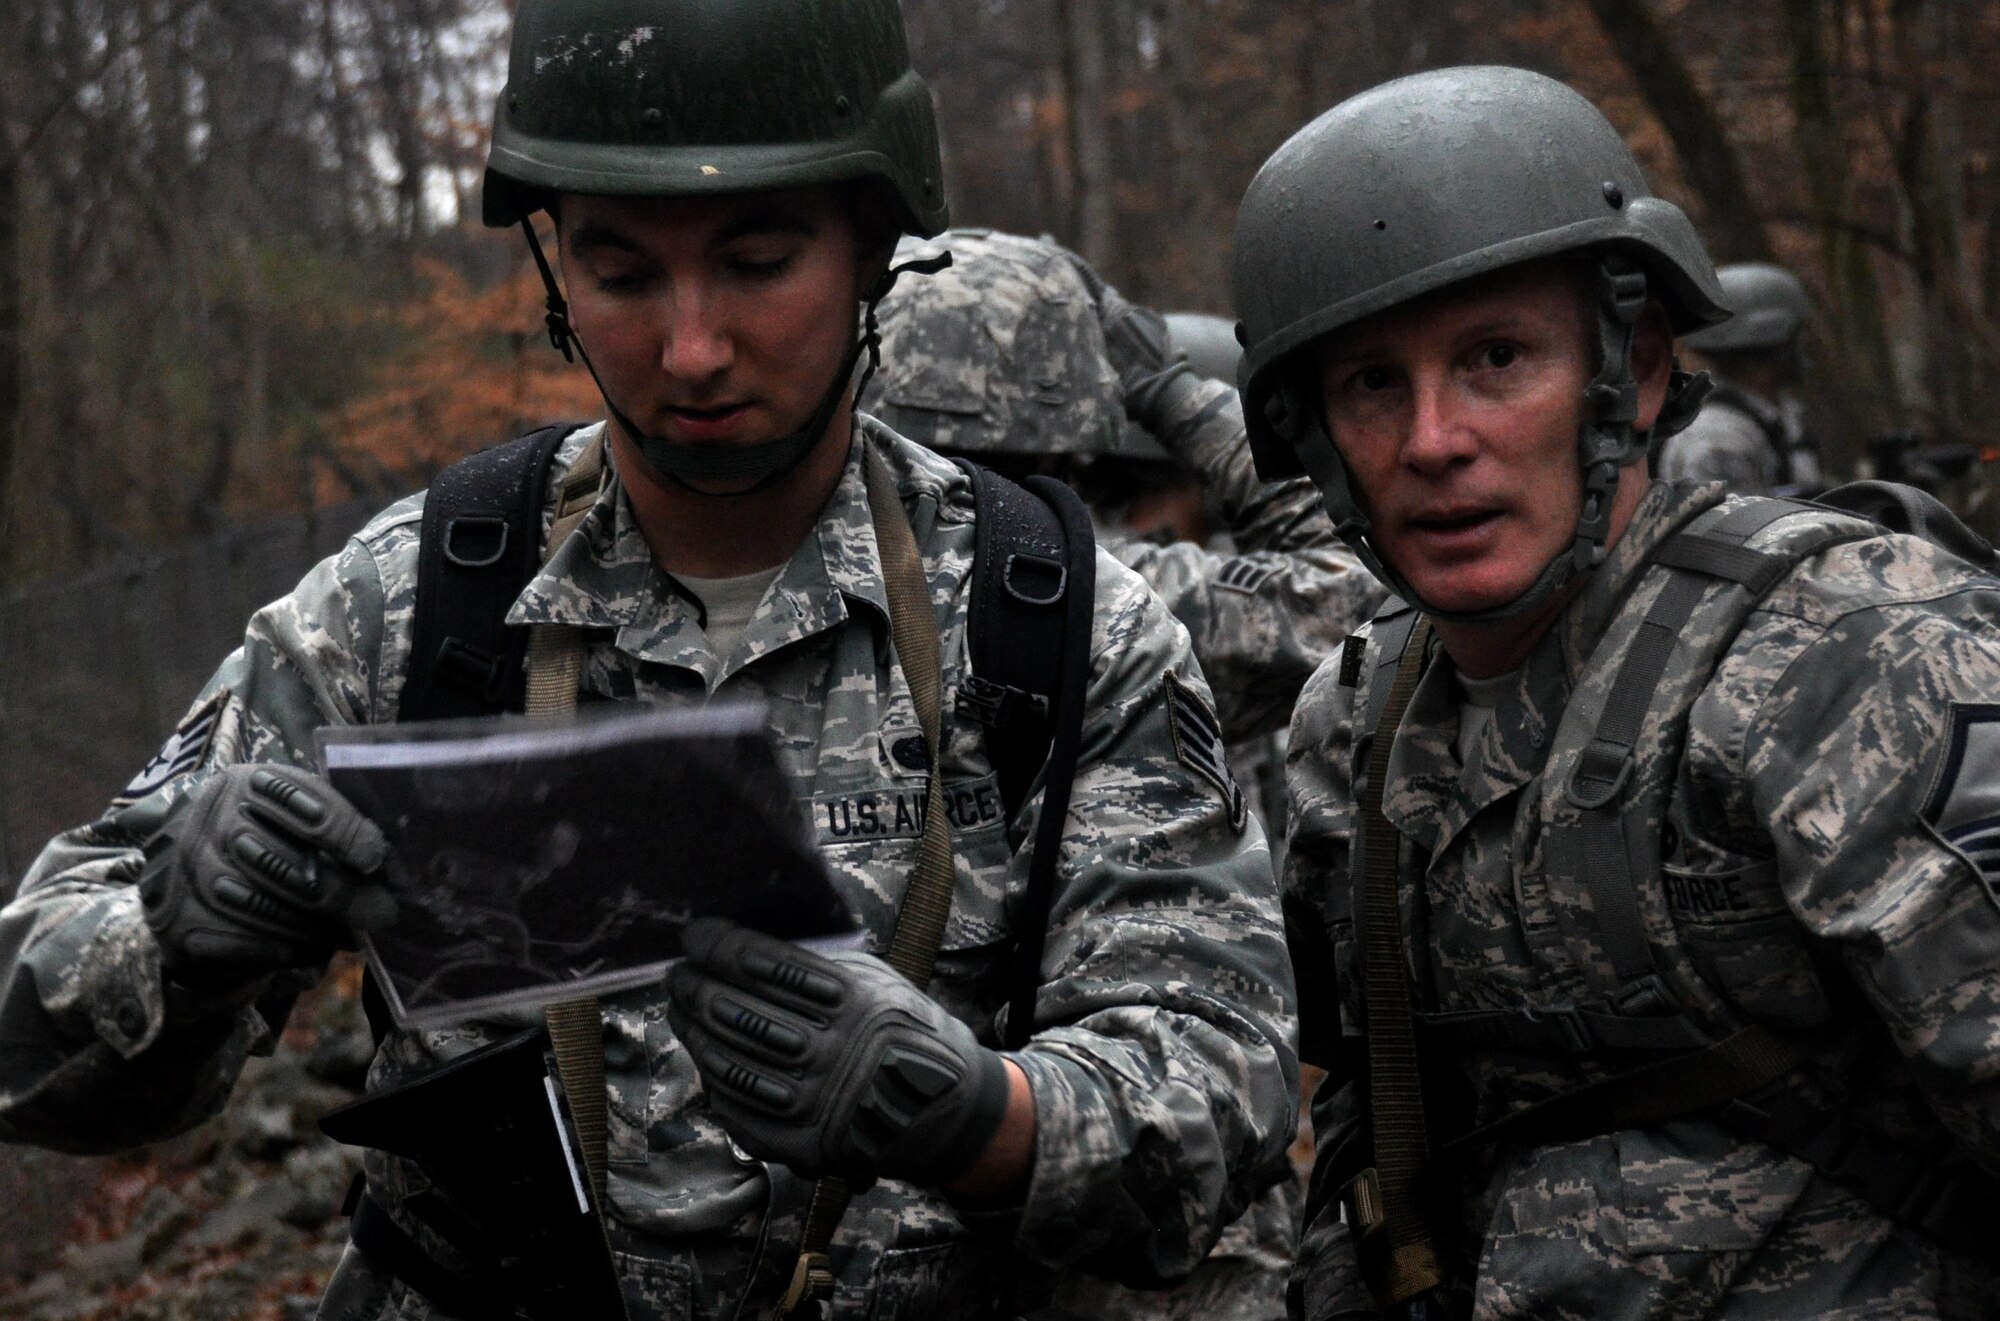 Staff Sgt. Daniel Chrest and Master Sgt. Mark Ansani, 911th Force Support Squadron, Pittsburgh, Pa., plot out their route on a map during OPERATION Everybody Panic as part of Force Support Silver Flag at Dobbins Air Reserve Base, Ga., March 10, 2015. Teams were tasked with engaging targets, self-aid buddy care, providing care under fire, identifying unexploded ordnances and improvised explosive devices, describing and providing the location of the UXOs and IEDs on a grid, low and high crawling, and transporting remains during this scenario.  (U.S. Air Force photo/Senior Airman Daniel Phelps)